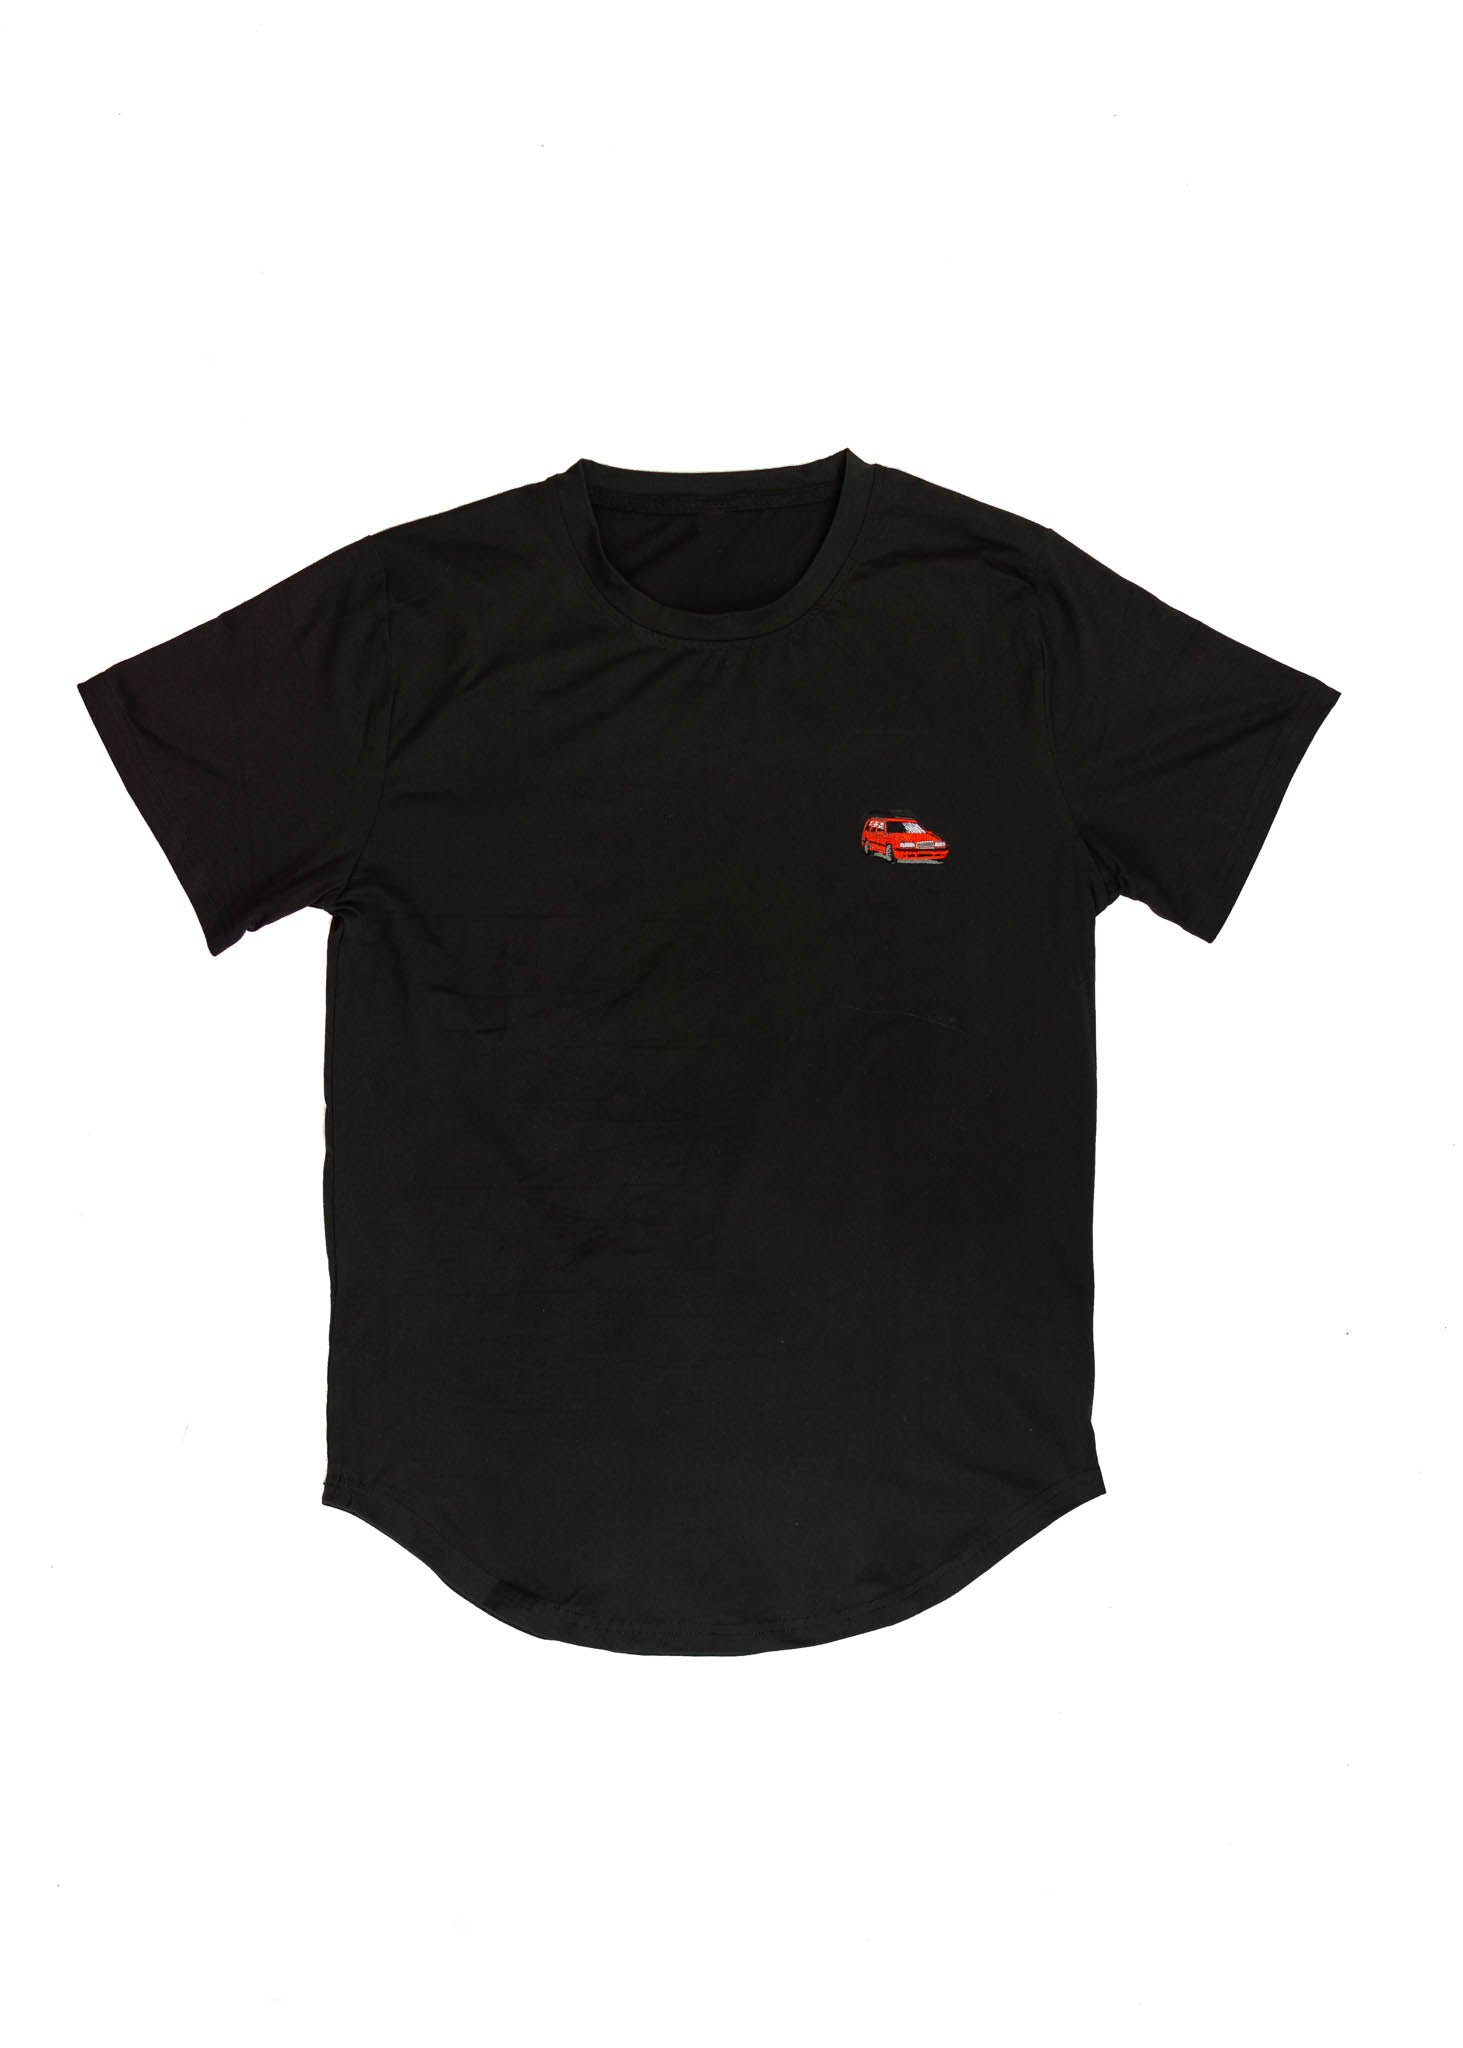 A black Volvo t-shirt for men. Photo is the front view of the shirt with an embroidered red 850R. Fabric composition is a polyester, and cotton mix. The material is very soft, stretchy, non-transparent. The style of this shirt is short sleeve, with a crewneck neckline.